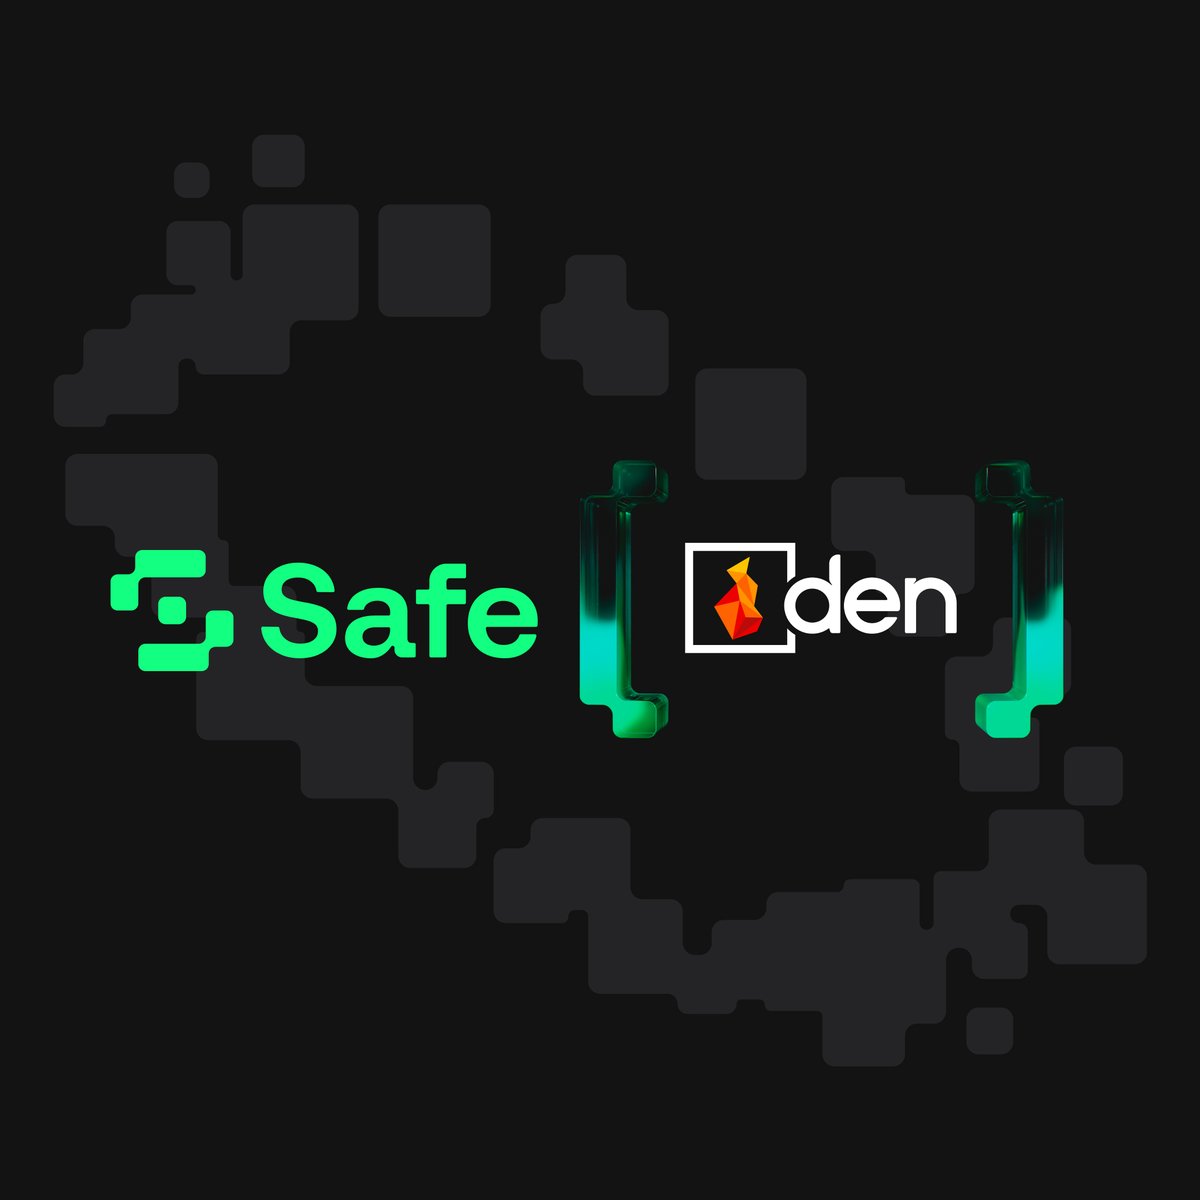 Onchain Coordination, Powered by Safe {🟢} @Onchainden is accelerating the top onchain teams to execute faster including features such as recurring transactions and embedded swaps. Stay tuned for Safe{Pass} Ecosystem Partner perks from the Den team!